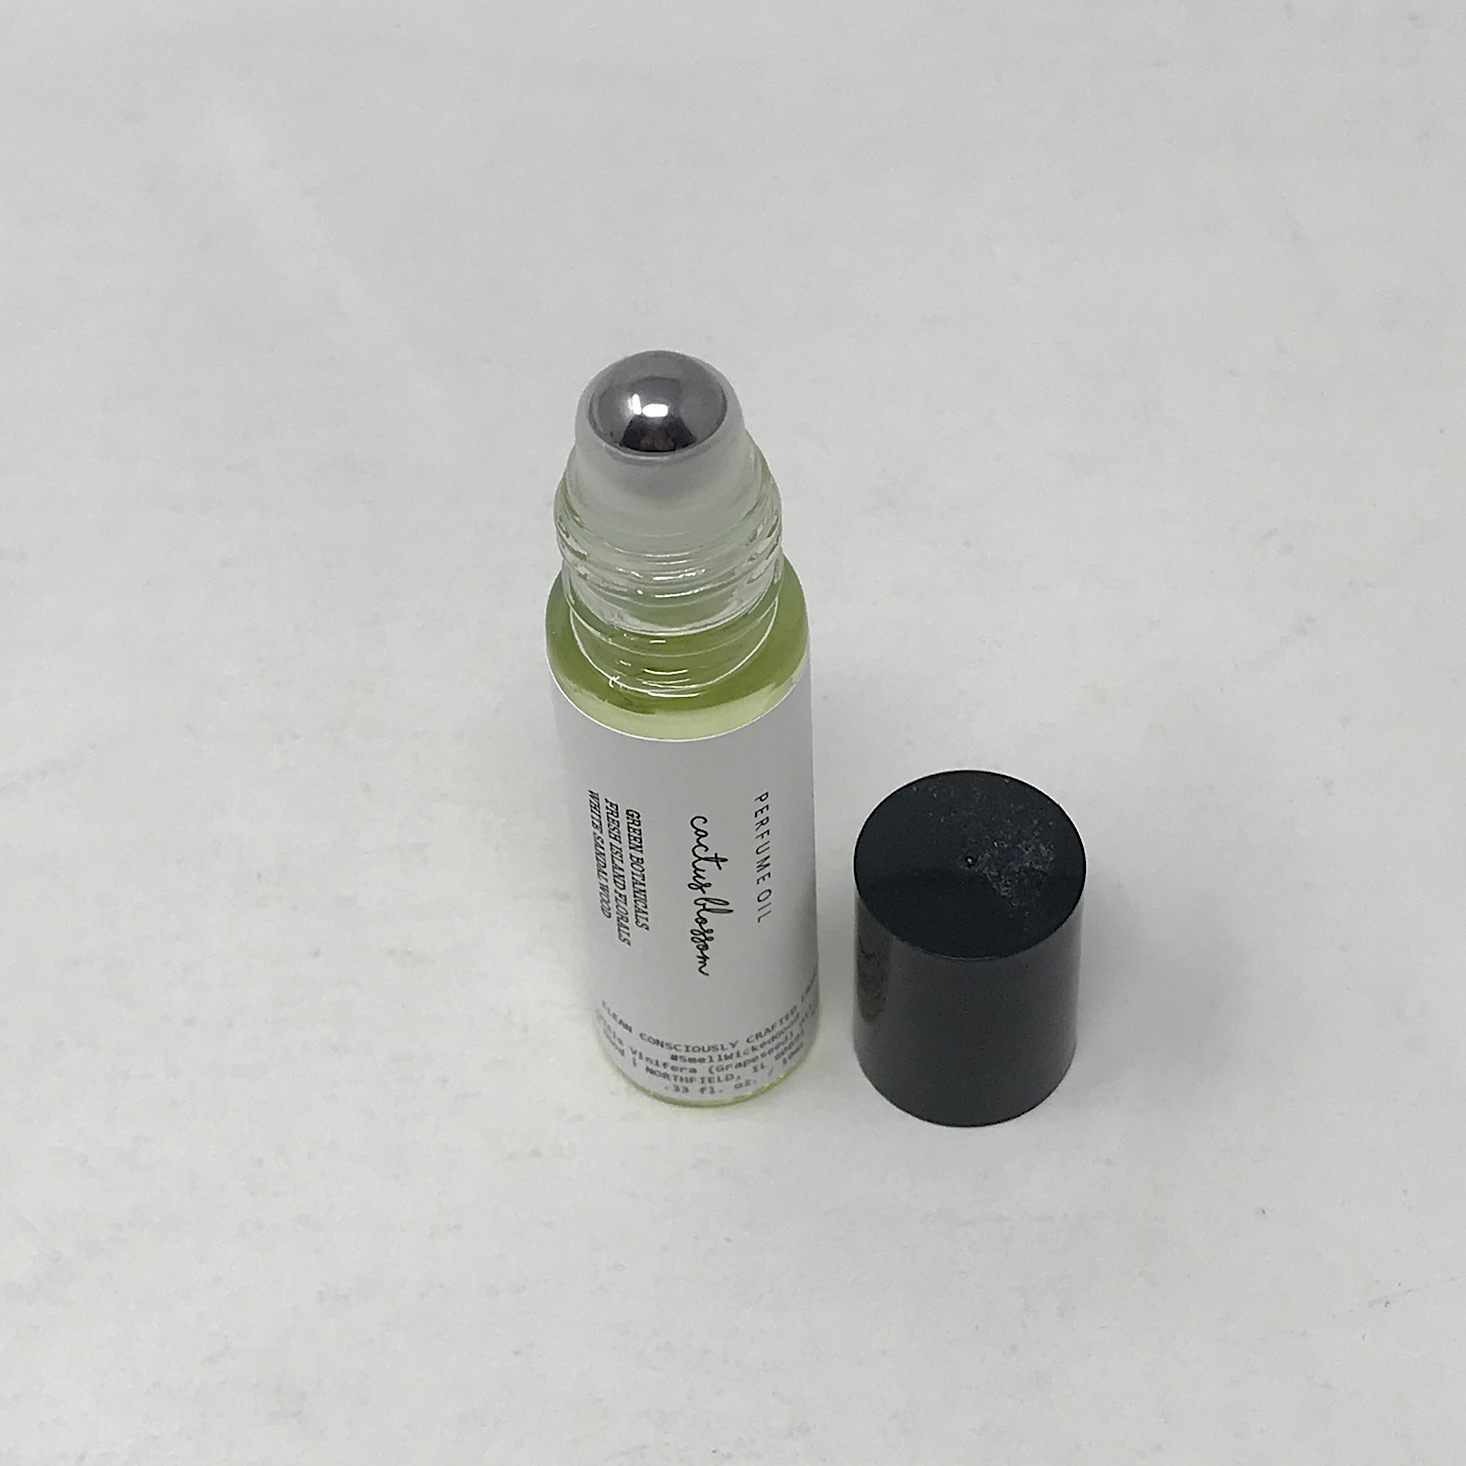 Wicked Good Perfume Review + Coupon - April 2020 | MSA